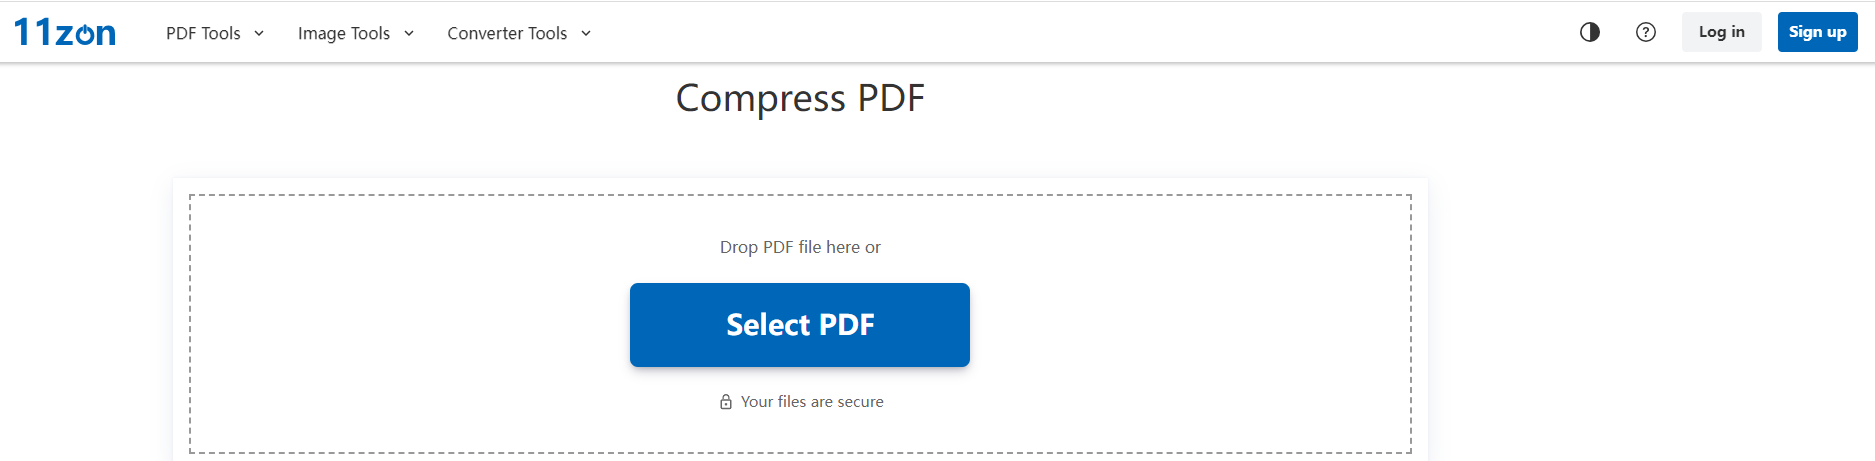 Compress PDF to 150KB with 11zon